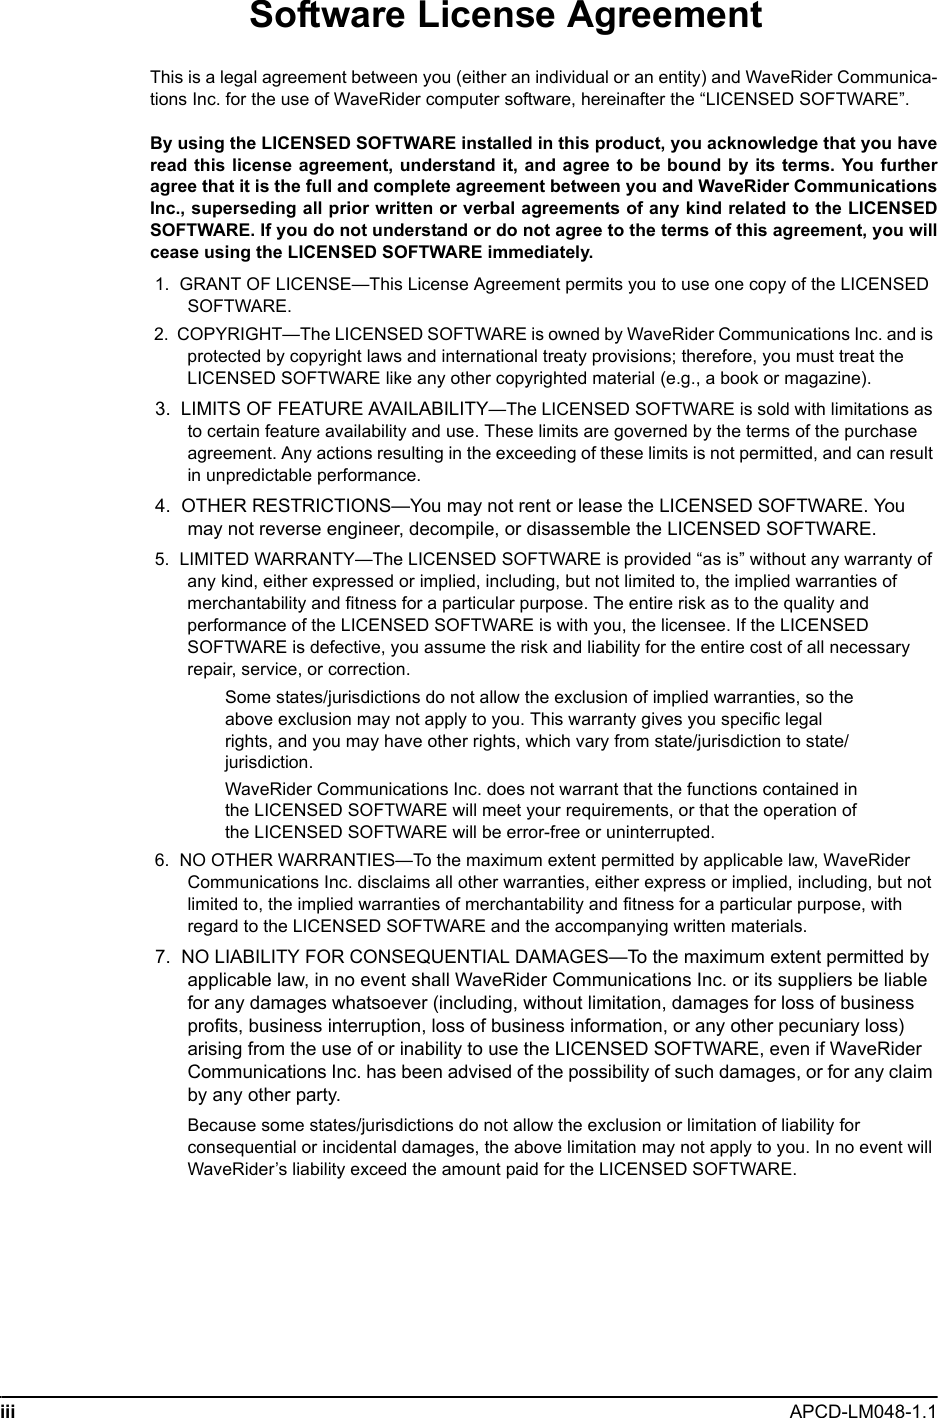 iii APCD-LM048-1.1 Software License AgreementThis is a legal agreement between you (either an individual or an entity) and WaveRider Communica-tions Inc. for the use of WaveRider computer software, hereinafter the “LICENSED SOFTWARE”.By using the LICENSED SOFTWARE installed in this product, you acknowledge that you haveread this license agreement, understand it, and agree to be bound by its terms. You furtheragree that it is the full and complete agreement between you and WaveRider CommunicationsInc., superseding all prior written or verbal agreements of any kind related to the LICENSEDSOFTWARE. If you do not understand or do not agree to the terms of this agreement, you willcease using the LICENSED SOFTWARE immediately. 1.  GRANT OF LICENSE—This License Agreement permits you to use one copy of the LICENSED SOFTWARE. 2.  COPYRIGHT—The LICENSED SOFTWARE is owned by WaveRider Communications Inc. and is protected by copyright laws and international treaty provisions; therefore, you must treat the LICENSED SOFTWARE like any other copyrighted material (e.g., a book or magazine).  3.  LIMITS OF FEATURE AVAILABILITY—The LICENSED SOFTWARE is sold with limitations as to certain feature availability and use. These limits are governed by the terms of the purchase agreement. Any actions resulting in the exceeding of these limits is not permitted, and can result in unpredictable performance. 4.  OTHER RESTRICTIONS—You may not rent or lease the LICENSED SOFTWARE. You may not reverse engineer, decompile, or disassemble the LICENSED SOFTWARE. 5.  LIMITED WARRANTY—The LICENSED SOFTWARE is provided “as is” without any warranty of any kind, either expressed or implied, including, but not limited to, the implied warranties of merchantability and fitness for a particular purpose. The entire risk as to the quality and performance of the LICENSED SOFTWARE is with you, the licensee. If the LICENSED SOFTWARE is defective, you assume the risk and liability for the entire cost of all necessary repair, service, or correction.Some states/jurisdictions do not allow the exclusion of implied warranties, so the above exclusion may not apply to you. This warranty gives you specific legal rights, and you may have other rights, which vary from state/jurisdiction to state/jurisdiction.WaveRider Communications Inc. does not warrant that the functions contained in the LICENSED SOFTWARE will meet your requirements, or that the operation of the LICENSED SOFTWARE will be error-free or uninterrupted. 6.  NO OTHER WARRANTIES—To the maximum extent permitted by applicable law, WaveRider Communications Inc. disclaims all other warranties, either express or implied, including, but not limited to, the implied warranties of merchantability and fitness for a particular purpose, with regard to the LICENSED SOFTWARE and the accompanying written materials. 7.  NO LIABILITY FOR CONSEQUENTIAL DAMAGES—To the maximum extent permitted by applicable law, in no event shall WaveRider Communications Inc. or its suppliers be liable for any damages whatsoever (including, without limitation, damages for loss of business profits, business interruption, loss of business information, or any other pecuniary loss) arising from the use of or inability to use the LICENSED SOFTWARE, even if WaveRider Communications Inc. has been advised of the possibility of such damages, or for any claim by any other party.Because some states/jurisdictions do not allow the exclusion or limitation of liability for consequential or incidental damages, the above limitation may not apply to you. In no event will WaveRider’s liability exceed the amount paid for the LICENSED SOFTWARE.